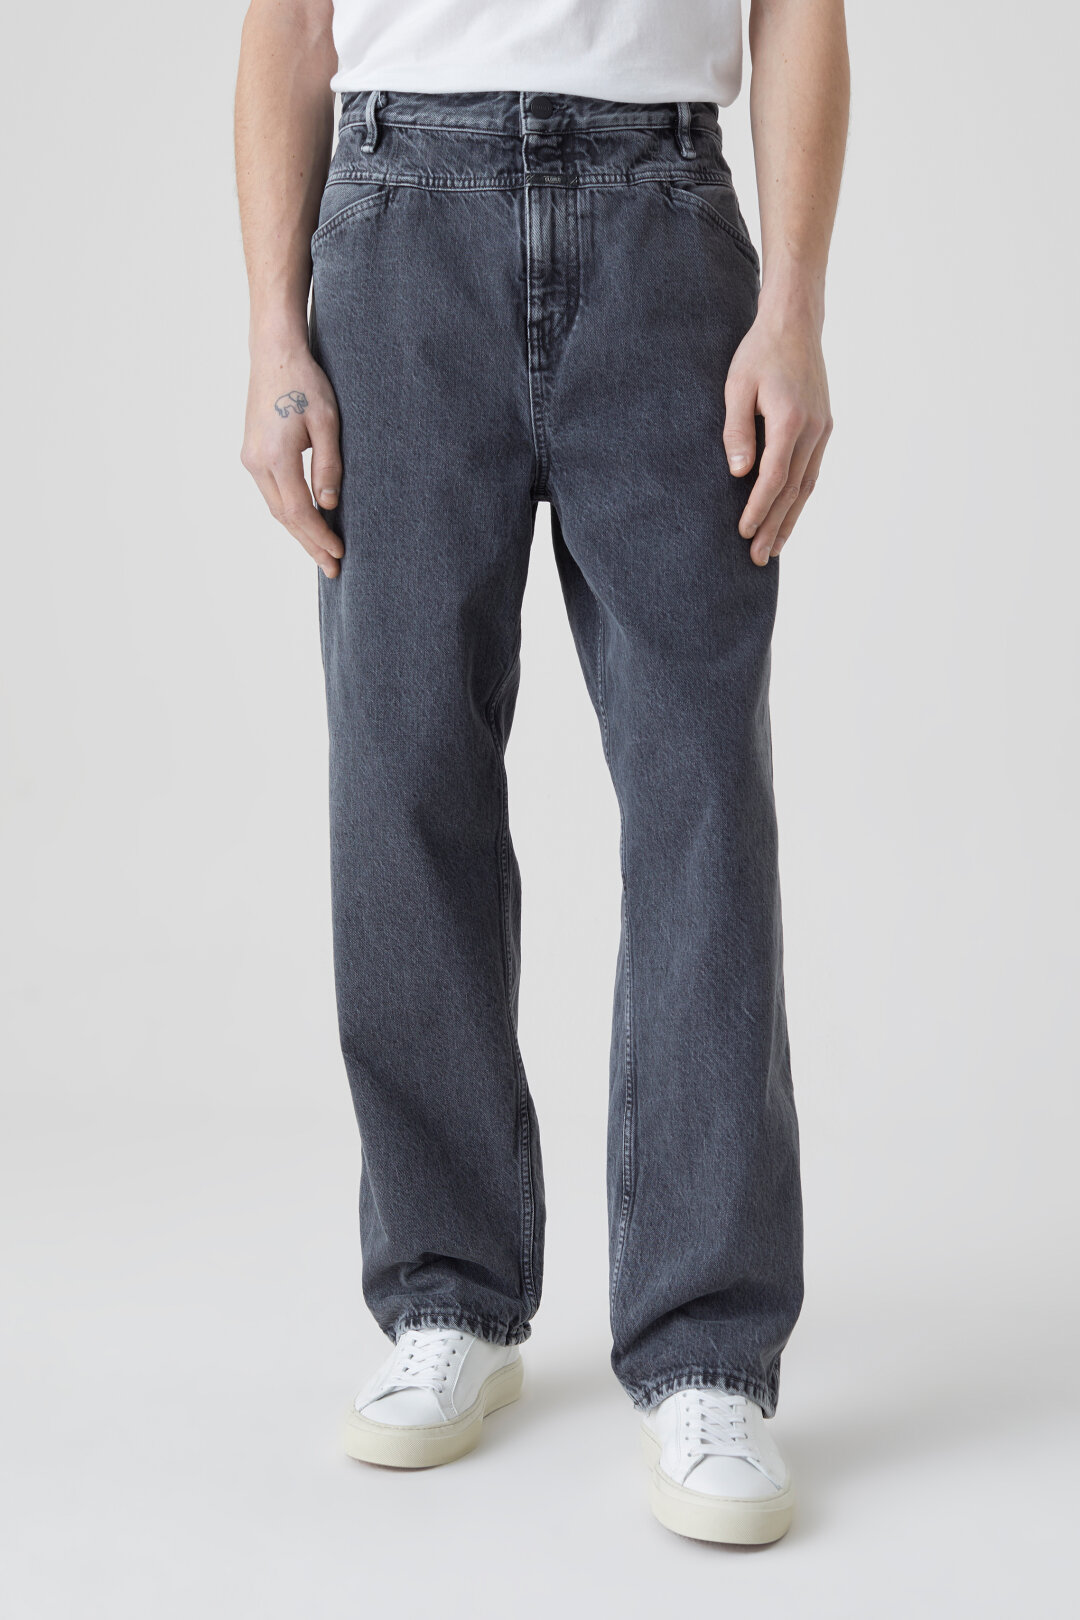 Closed X-Treme Loose Jeans in Darkgrey Wash